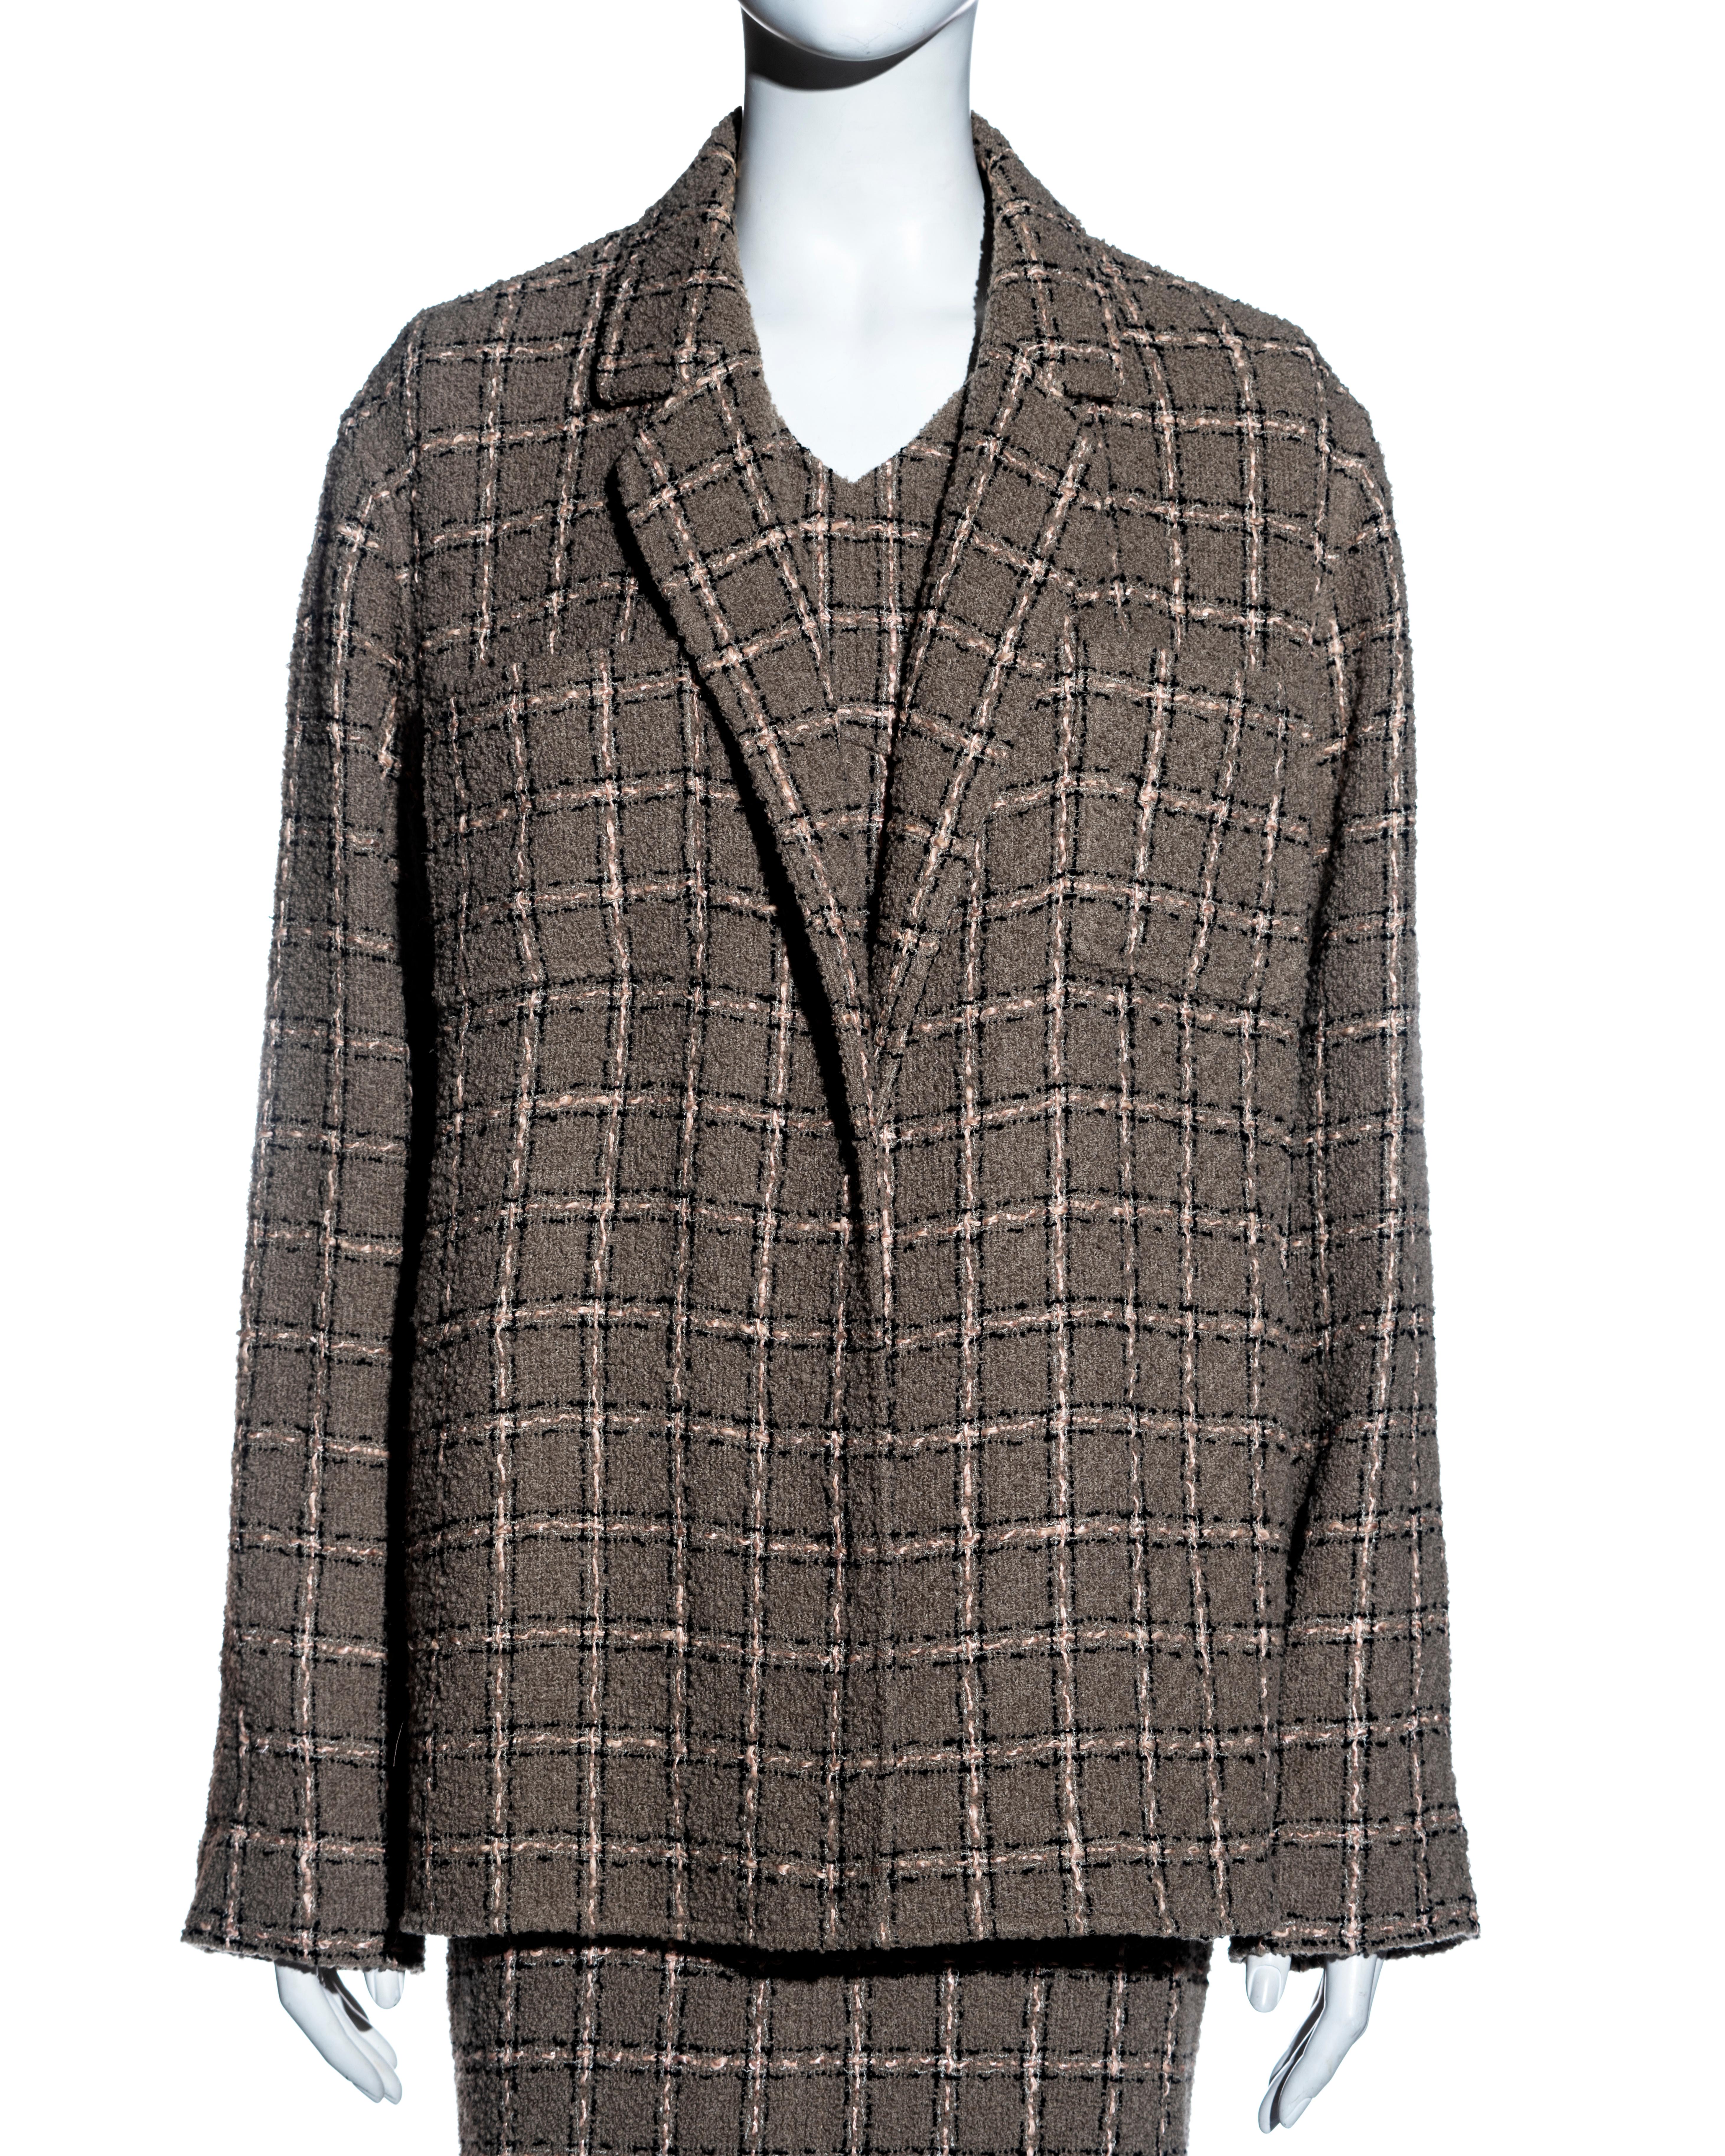 Chanel by Karl Lagerfeld checked taupe bouclé wool dress and jacket set, fw 1995 In Excellent Condition For Sale In London, GB